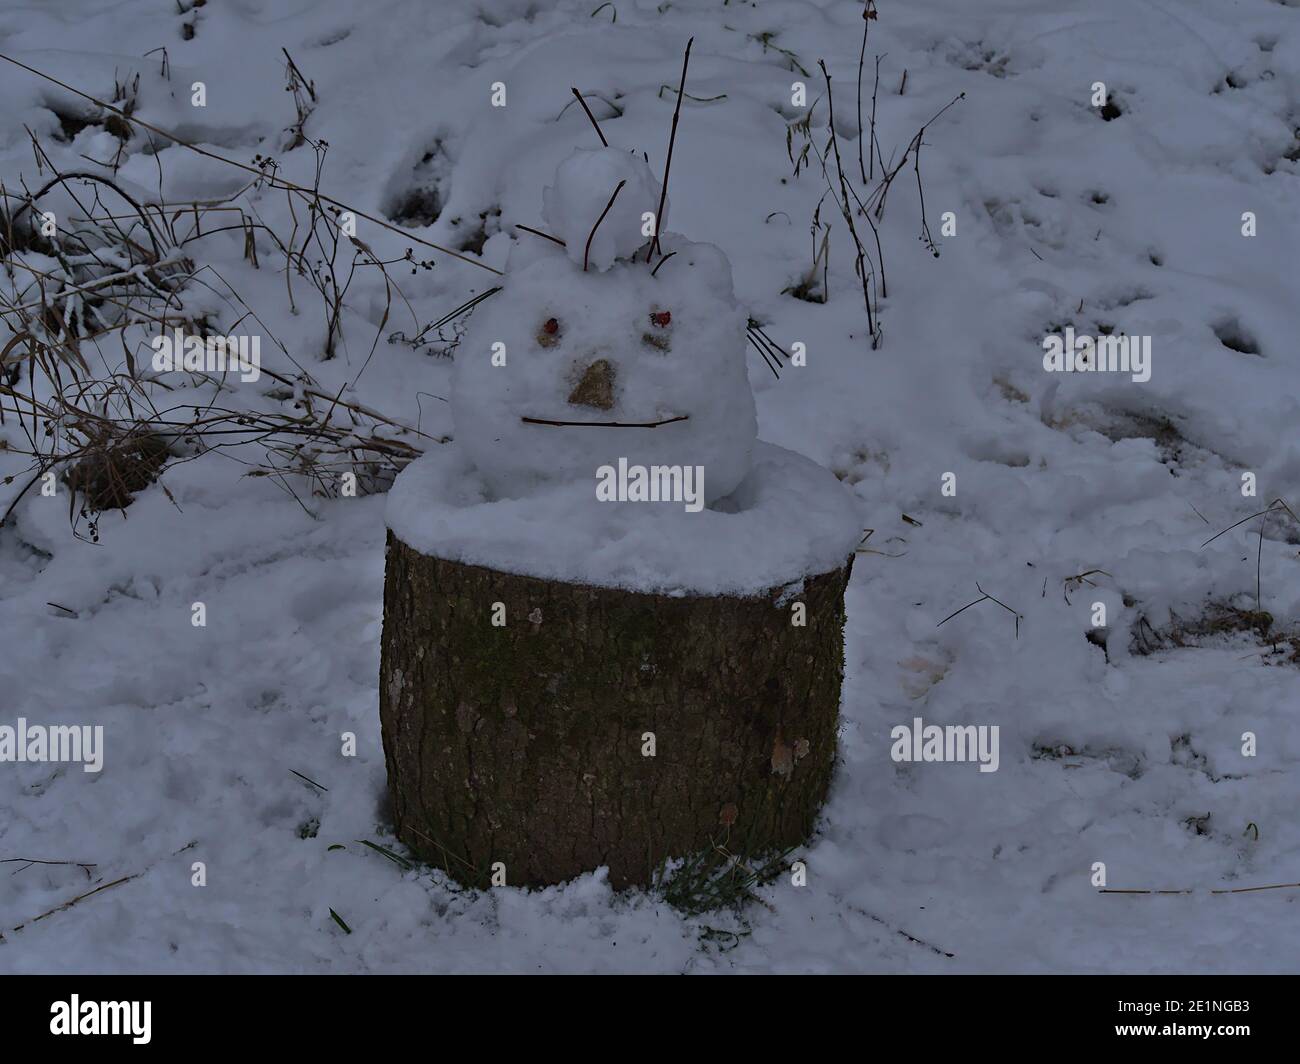 Front view of funny looking head built of snow on the top of a tree stump in a forest near Gruibingen, Swabian Alb, Germany in winter season. Stock Photo